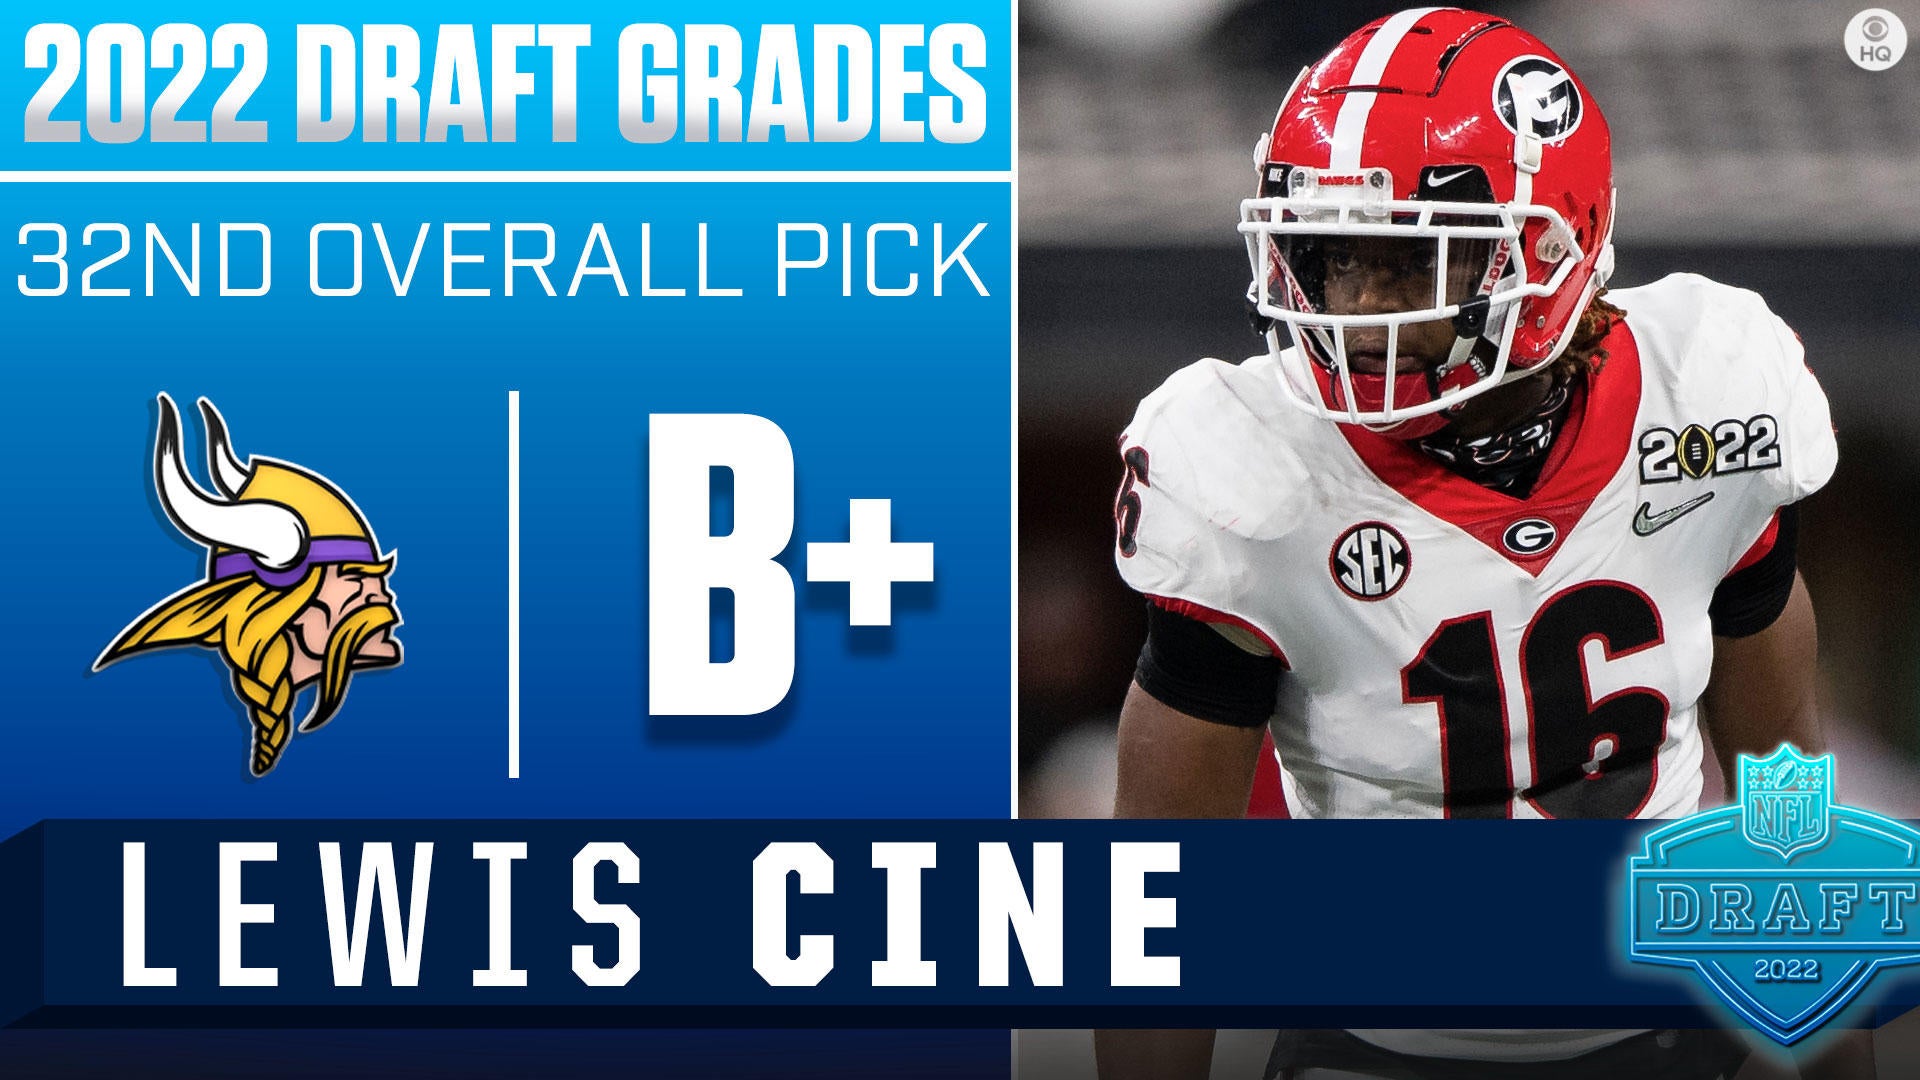 2022 NFL Draft Grades: Reaction to the Lewis Cine selection